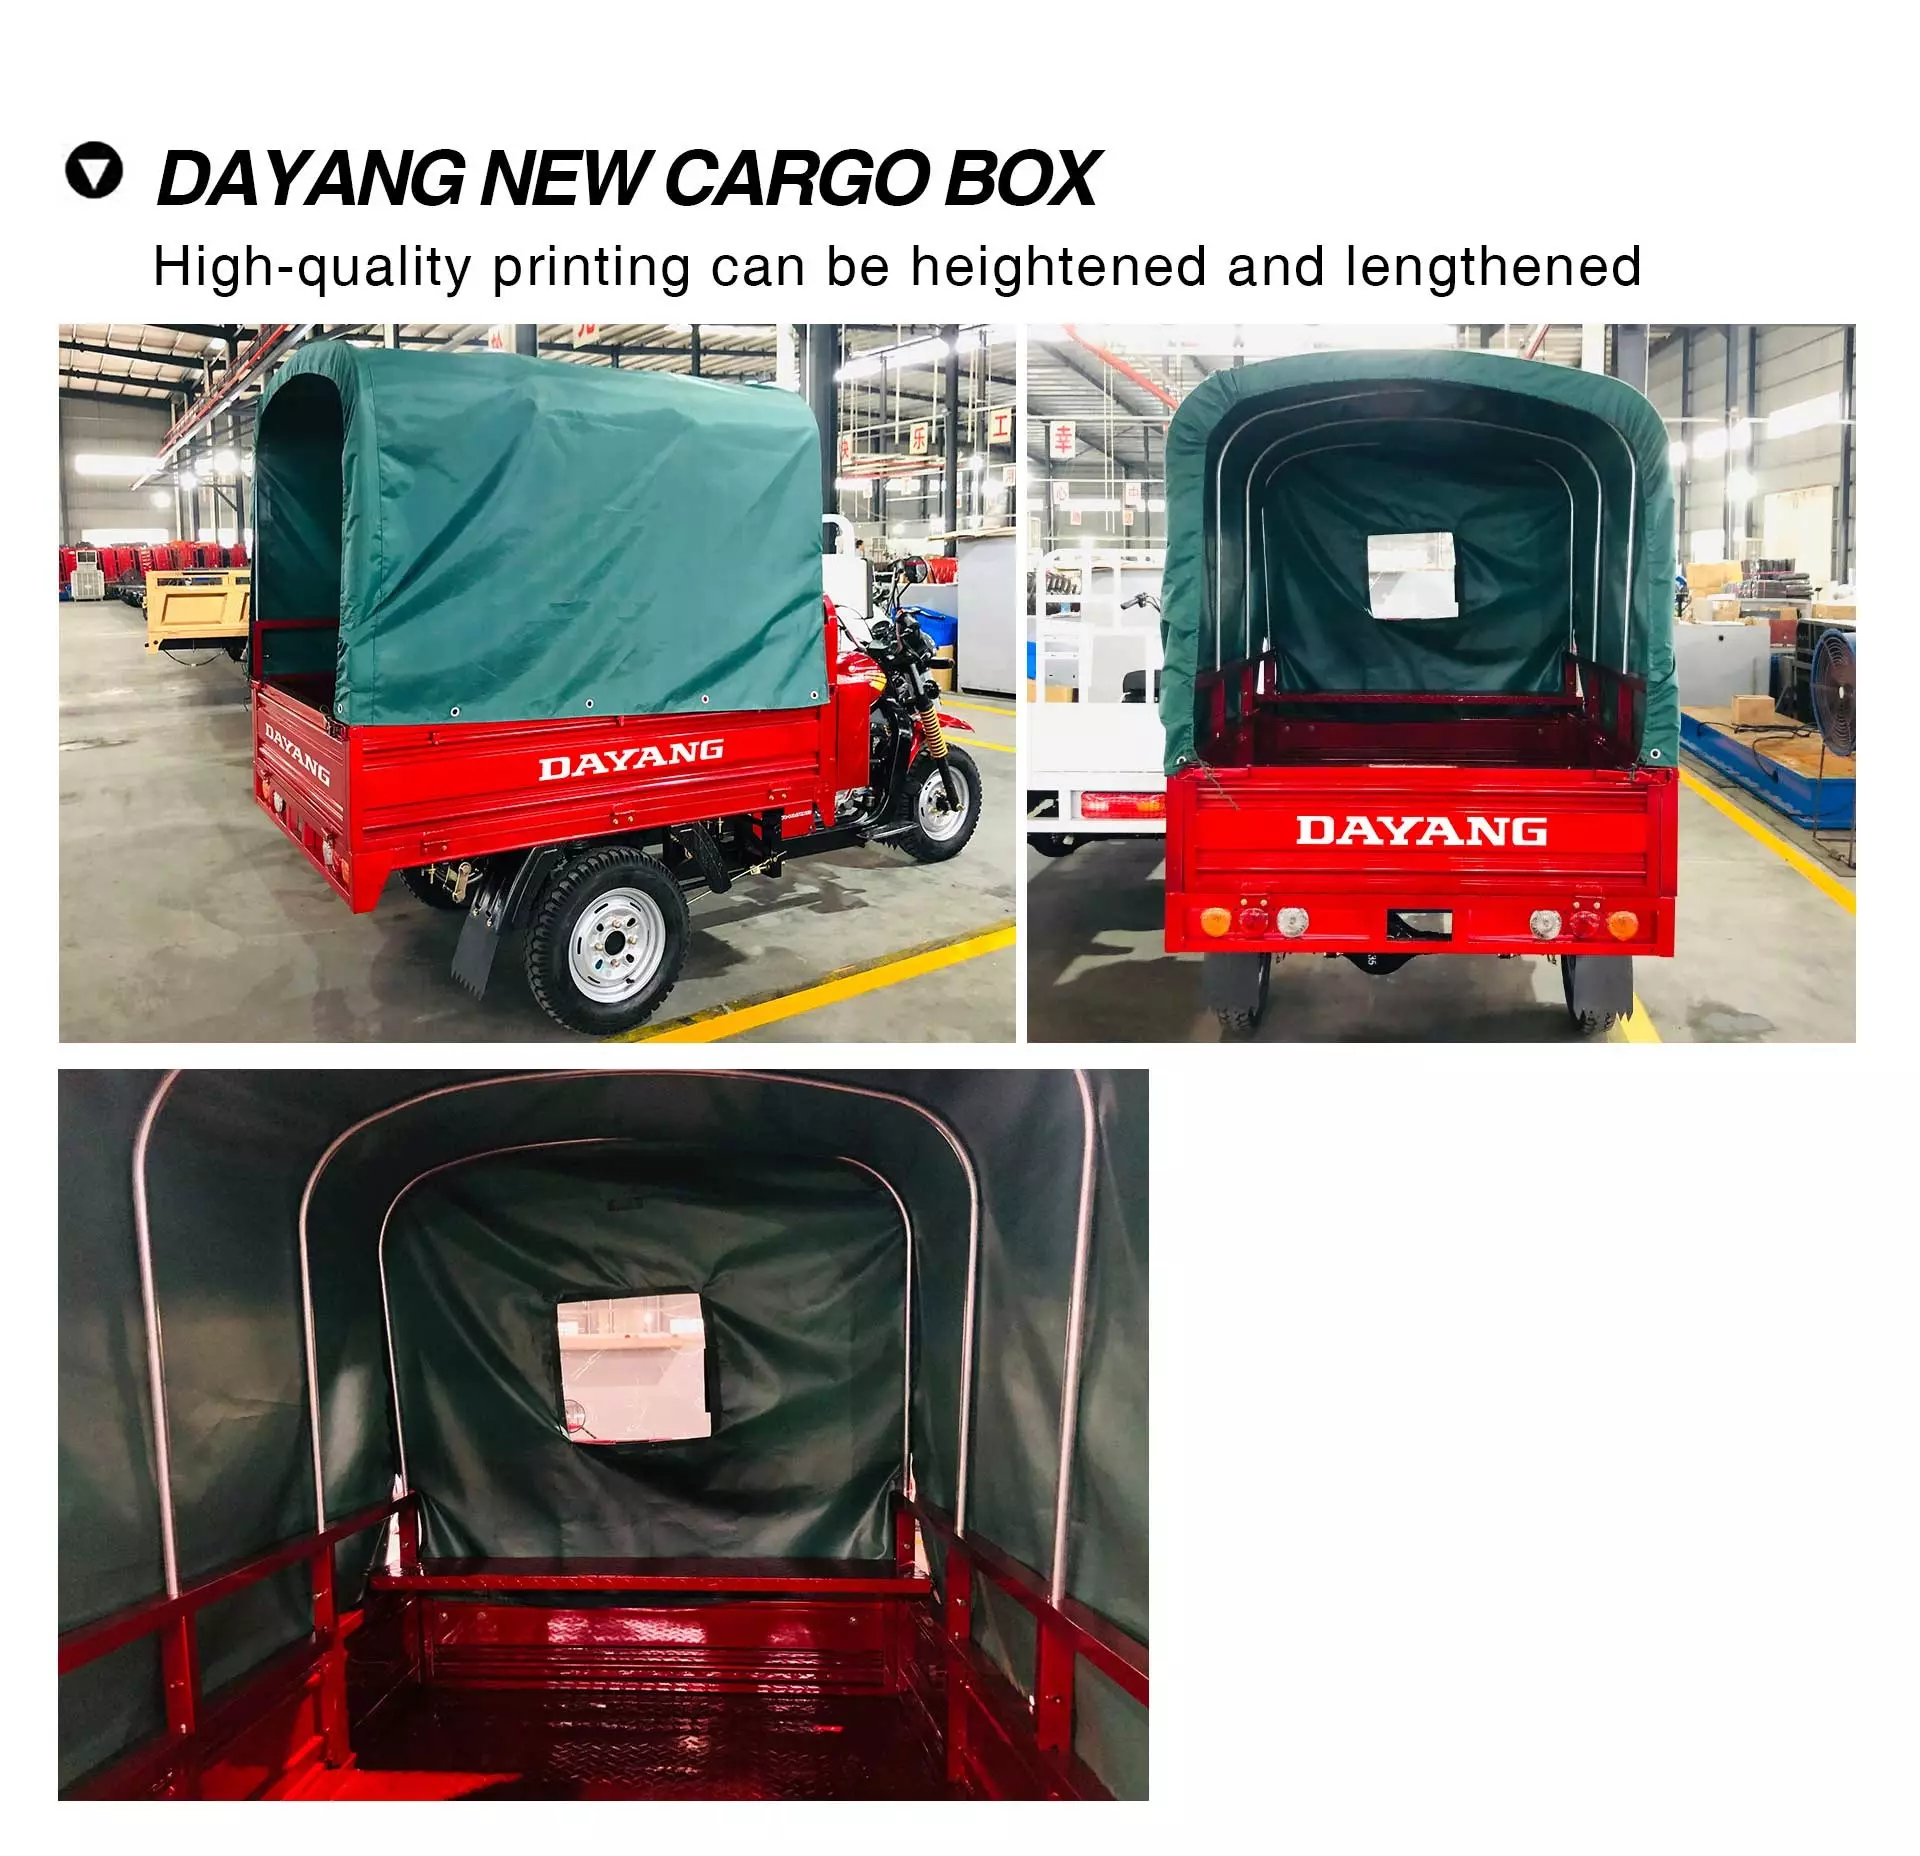 Driving cargo convenient best price zambia new model motorized tricycles dayang 150cc motorized tricycle